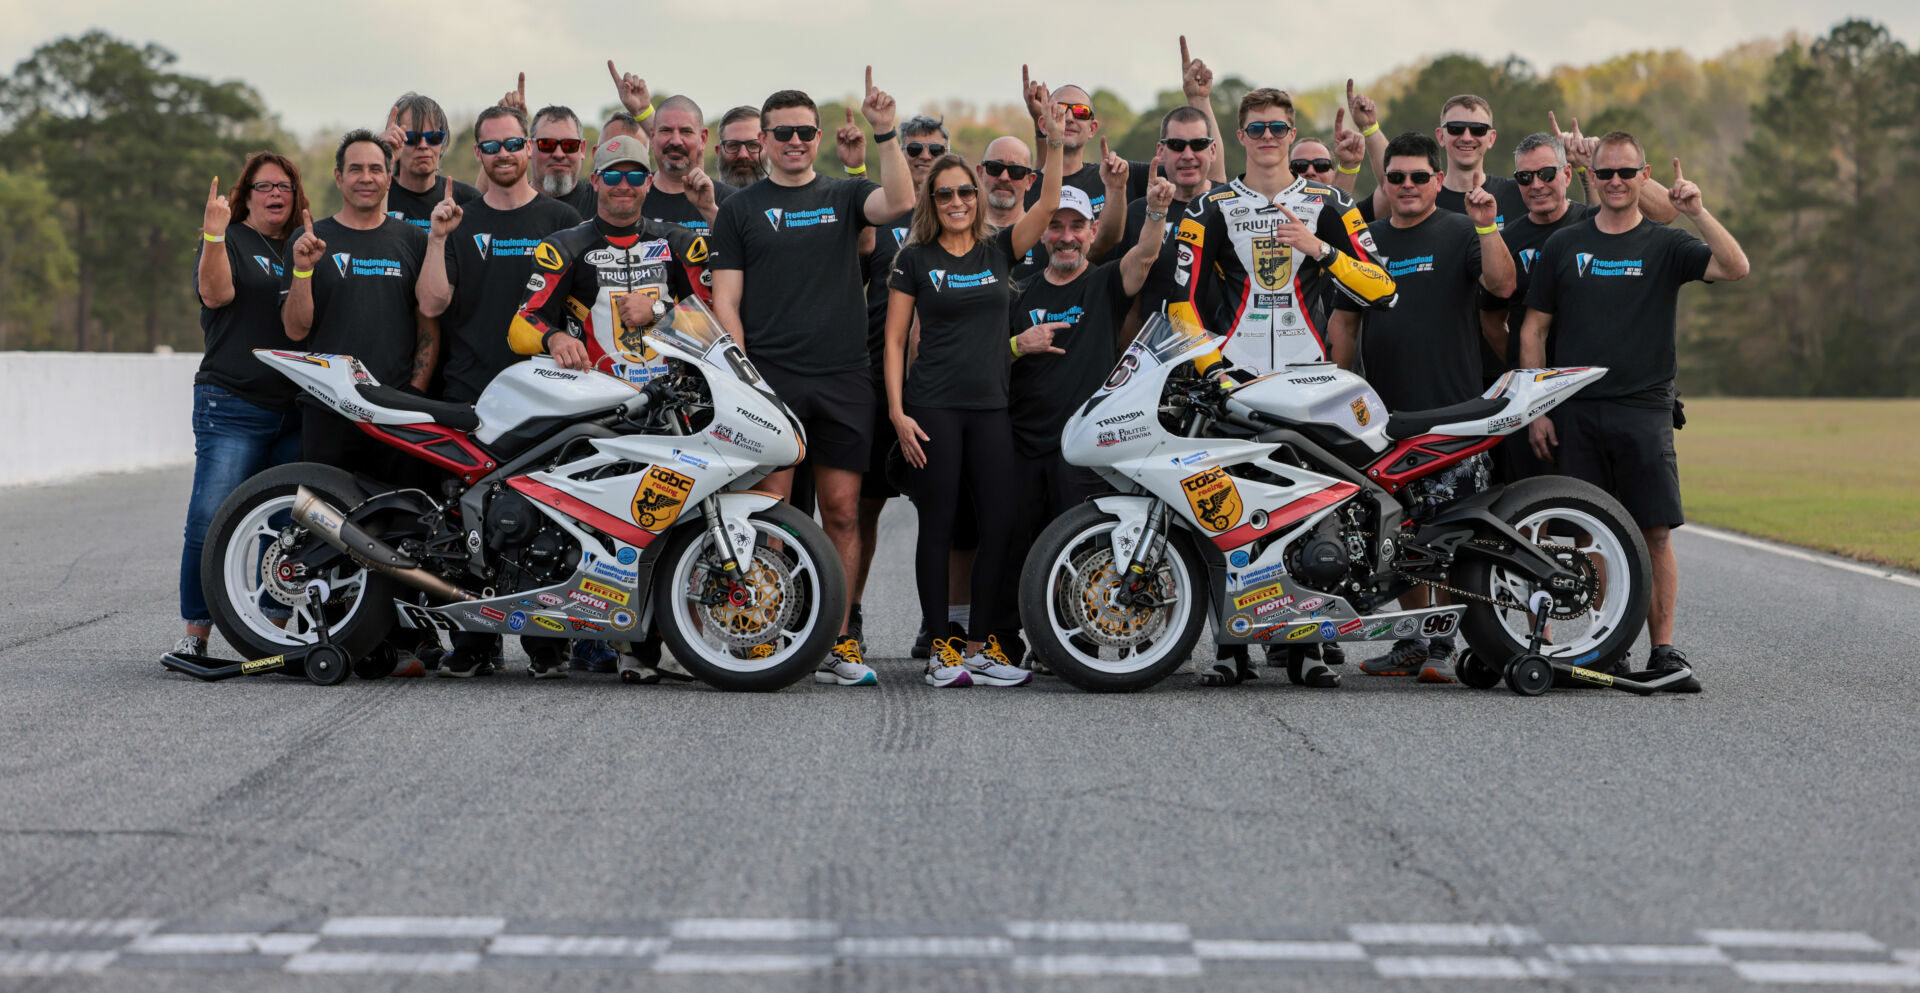 The TOBC Racing team with riders Danny Eslick (left) and Brandon Paasch (right). Photo courtesy Triumph.